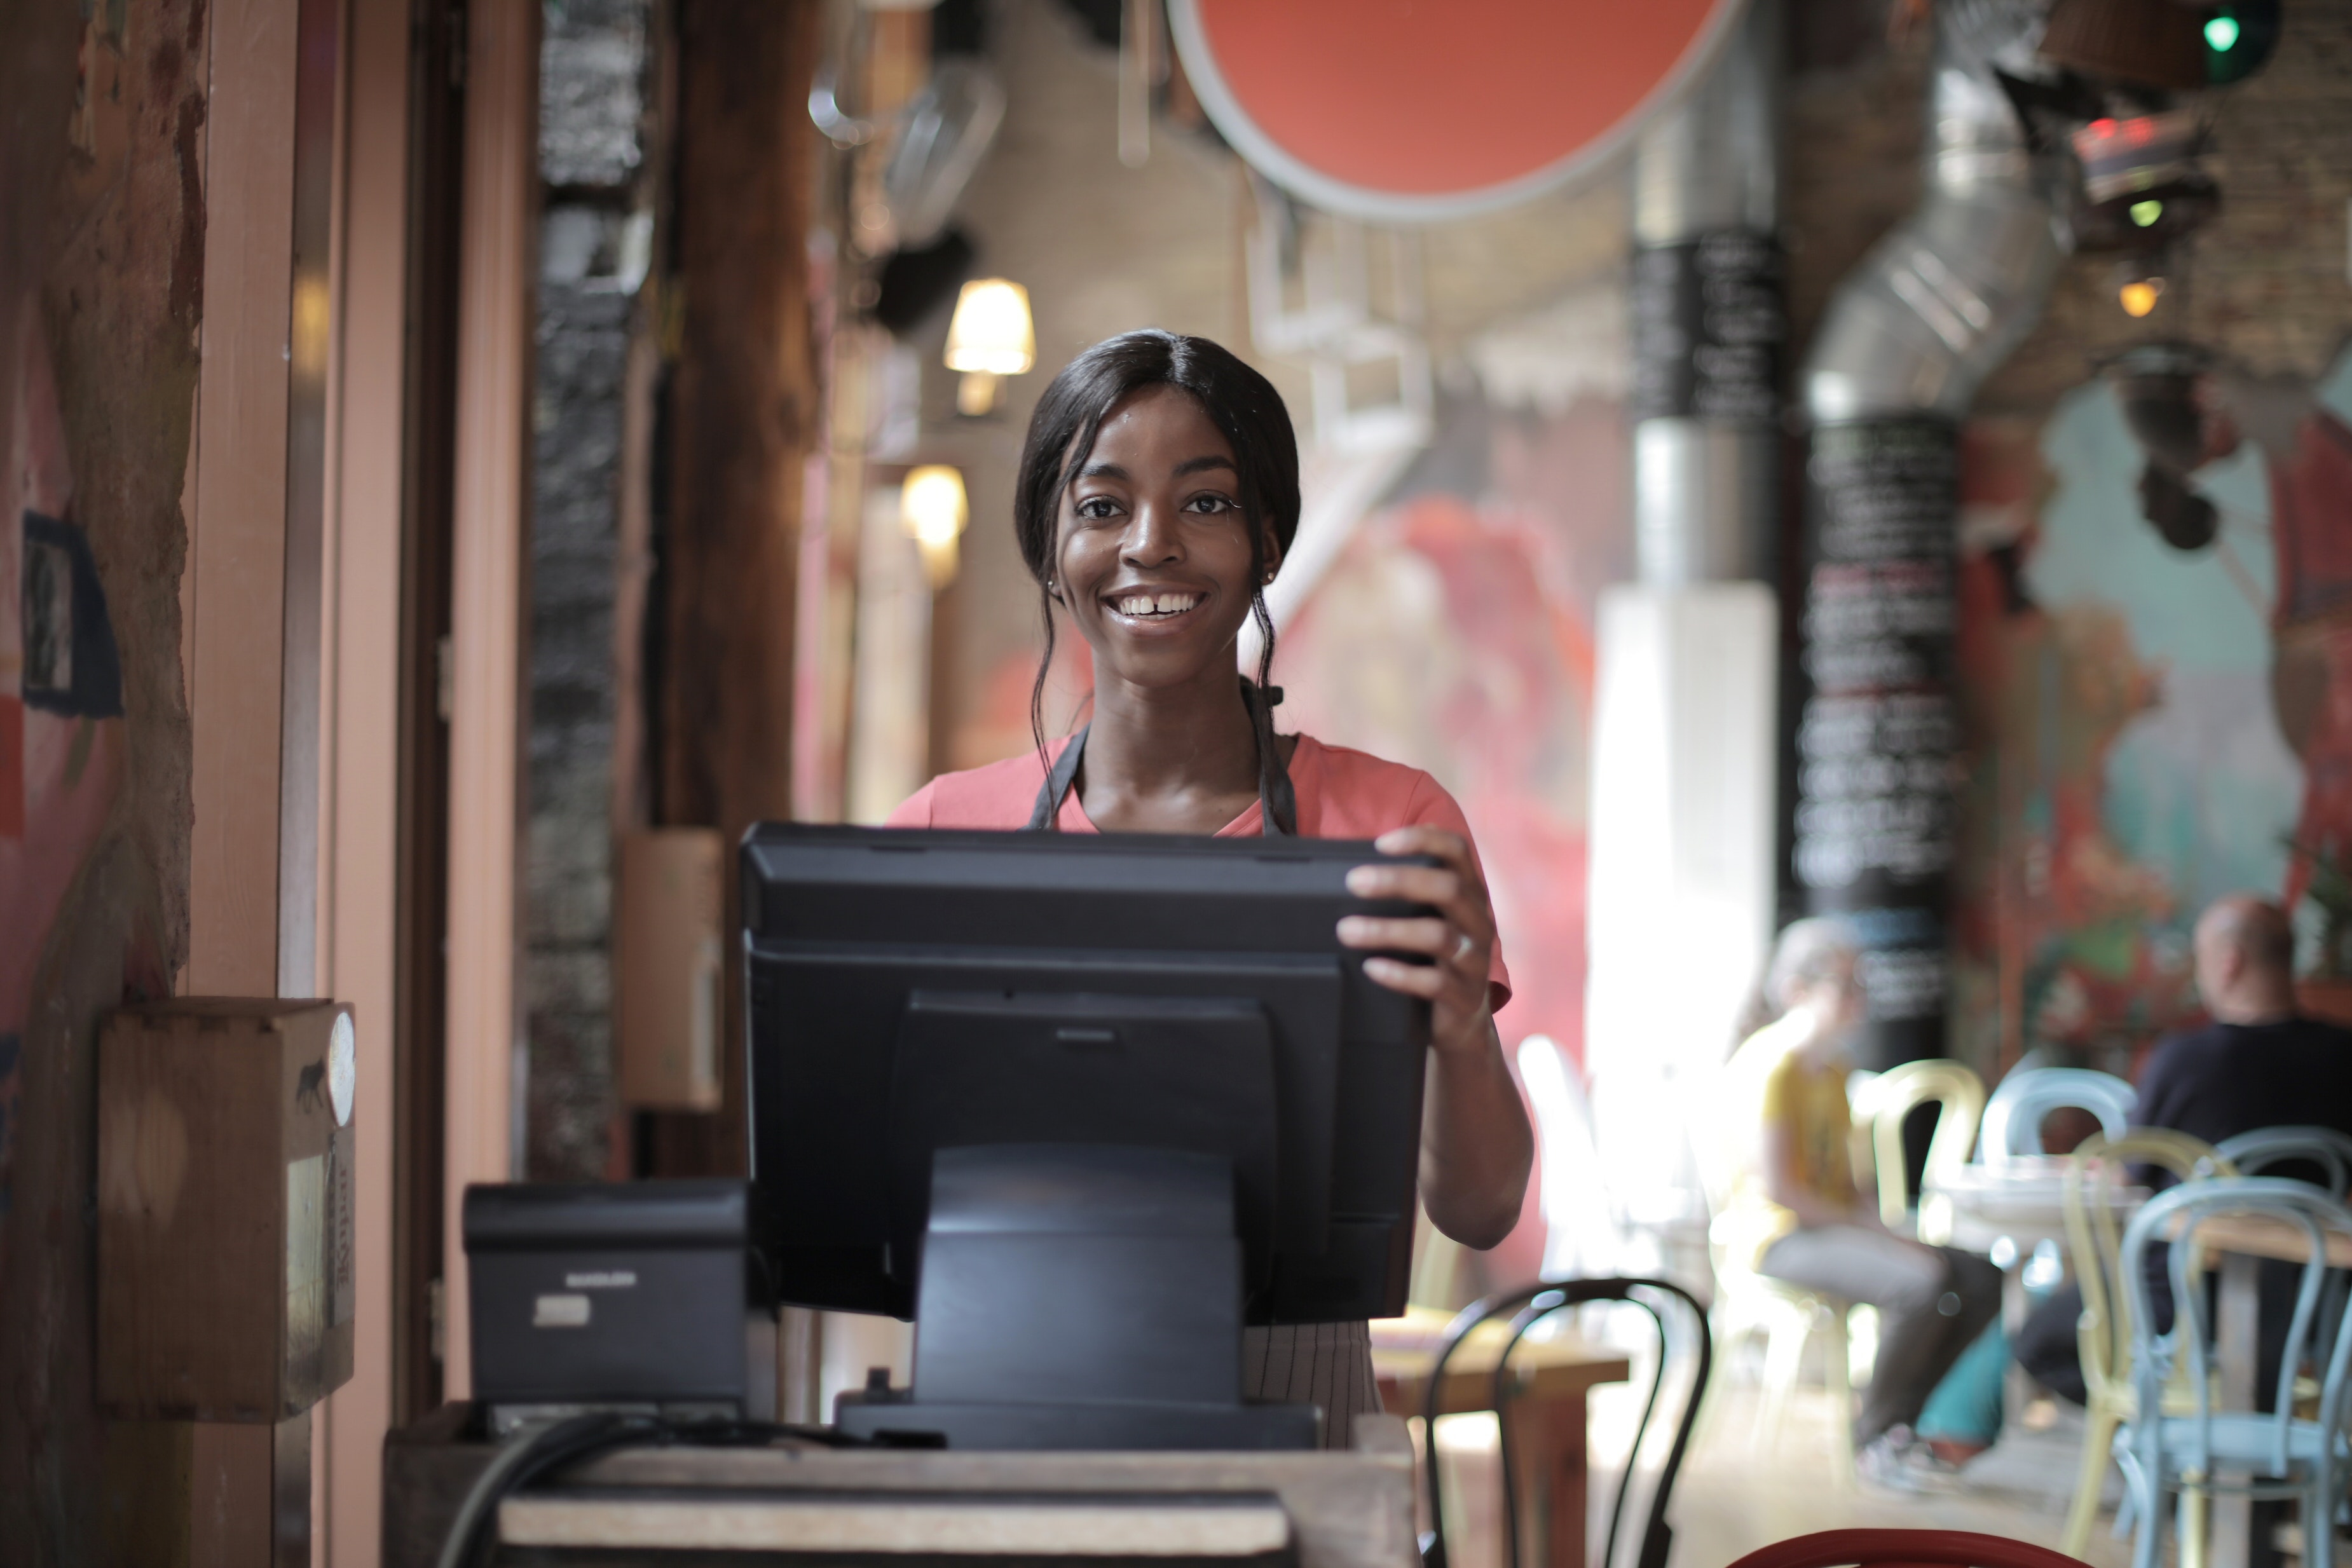 A young woman in a pink shirt and a black apron stands behind a cash register, smiling. She has dark hair that is gathered in a low ponytail with two strands dangling in front of her face.